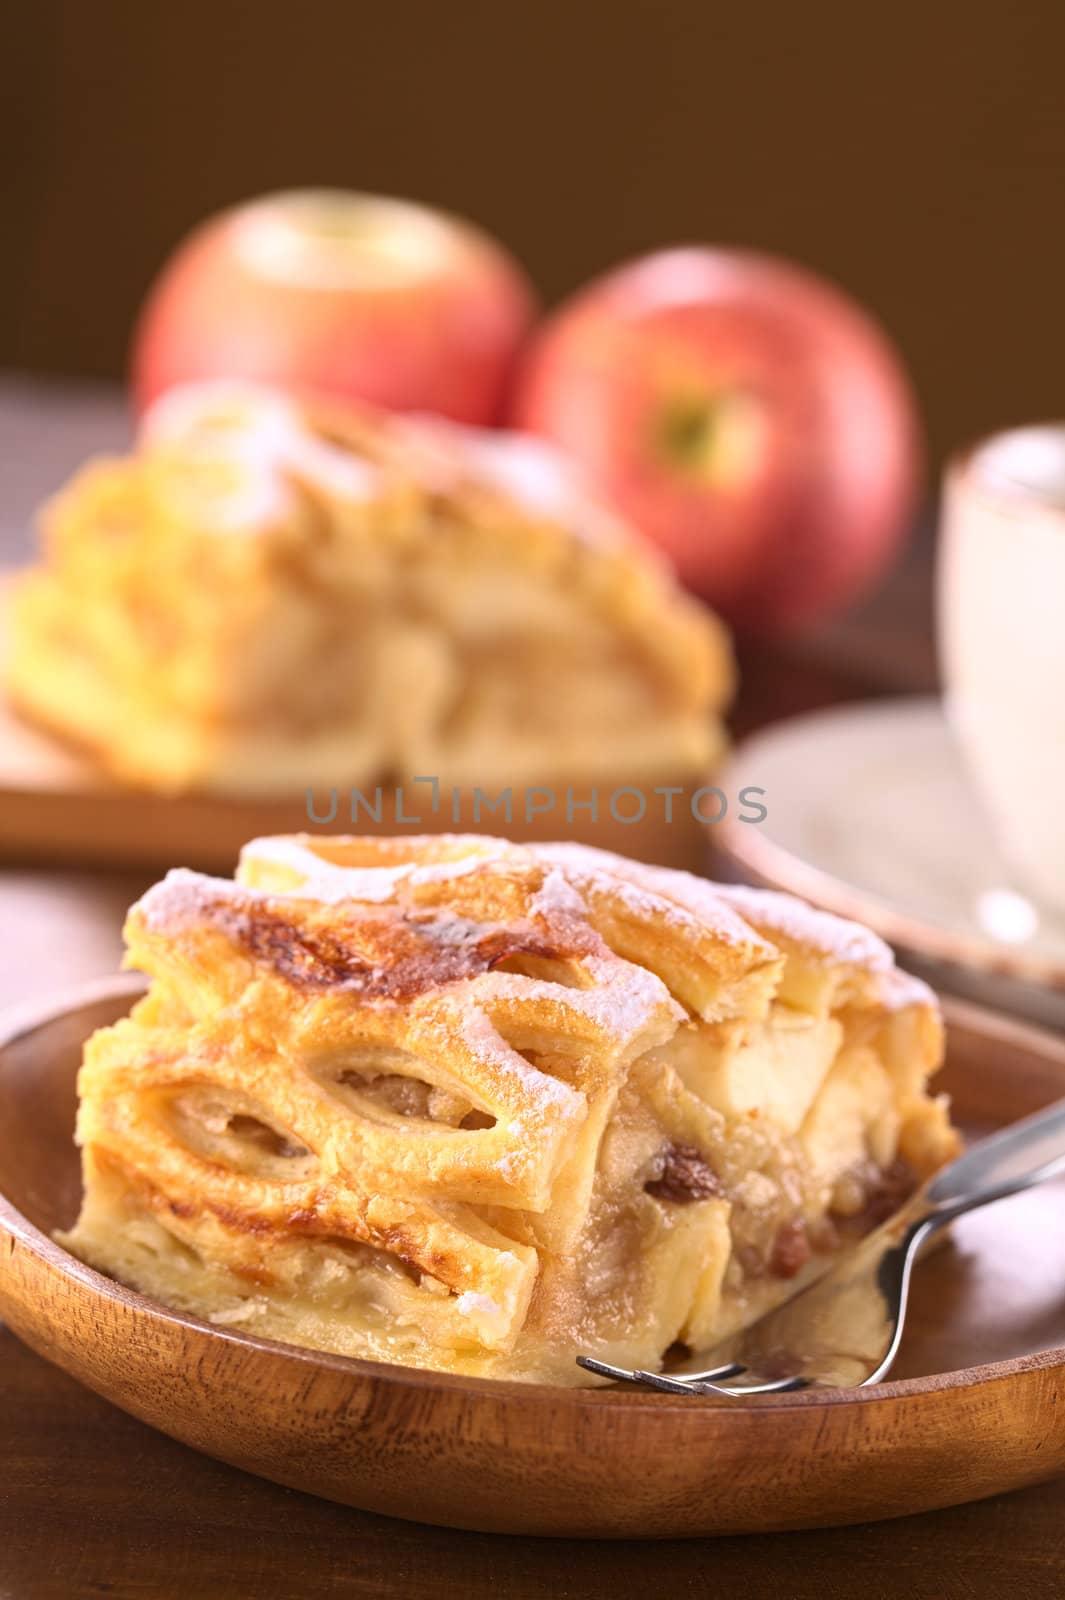 Apple strudel with raisins (Selective Focus, Focus on the right front ede of the strudel)